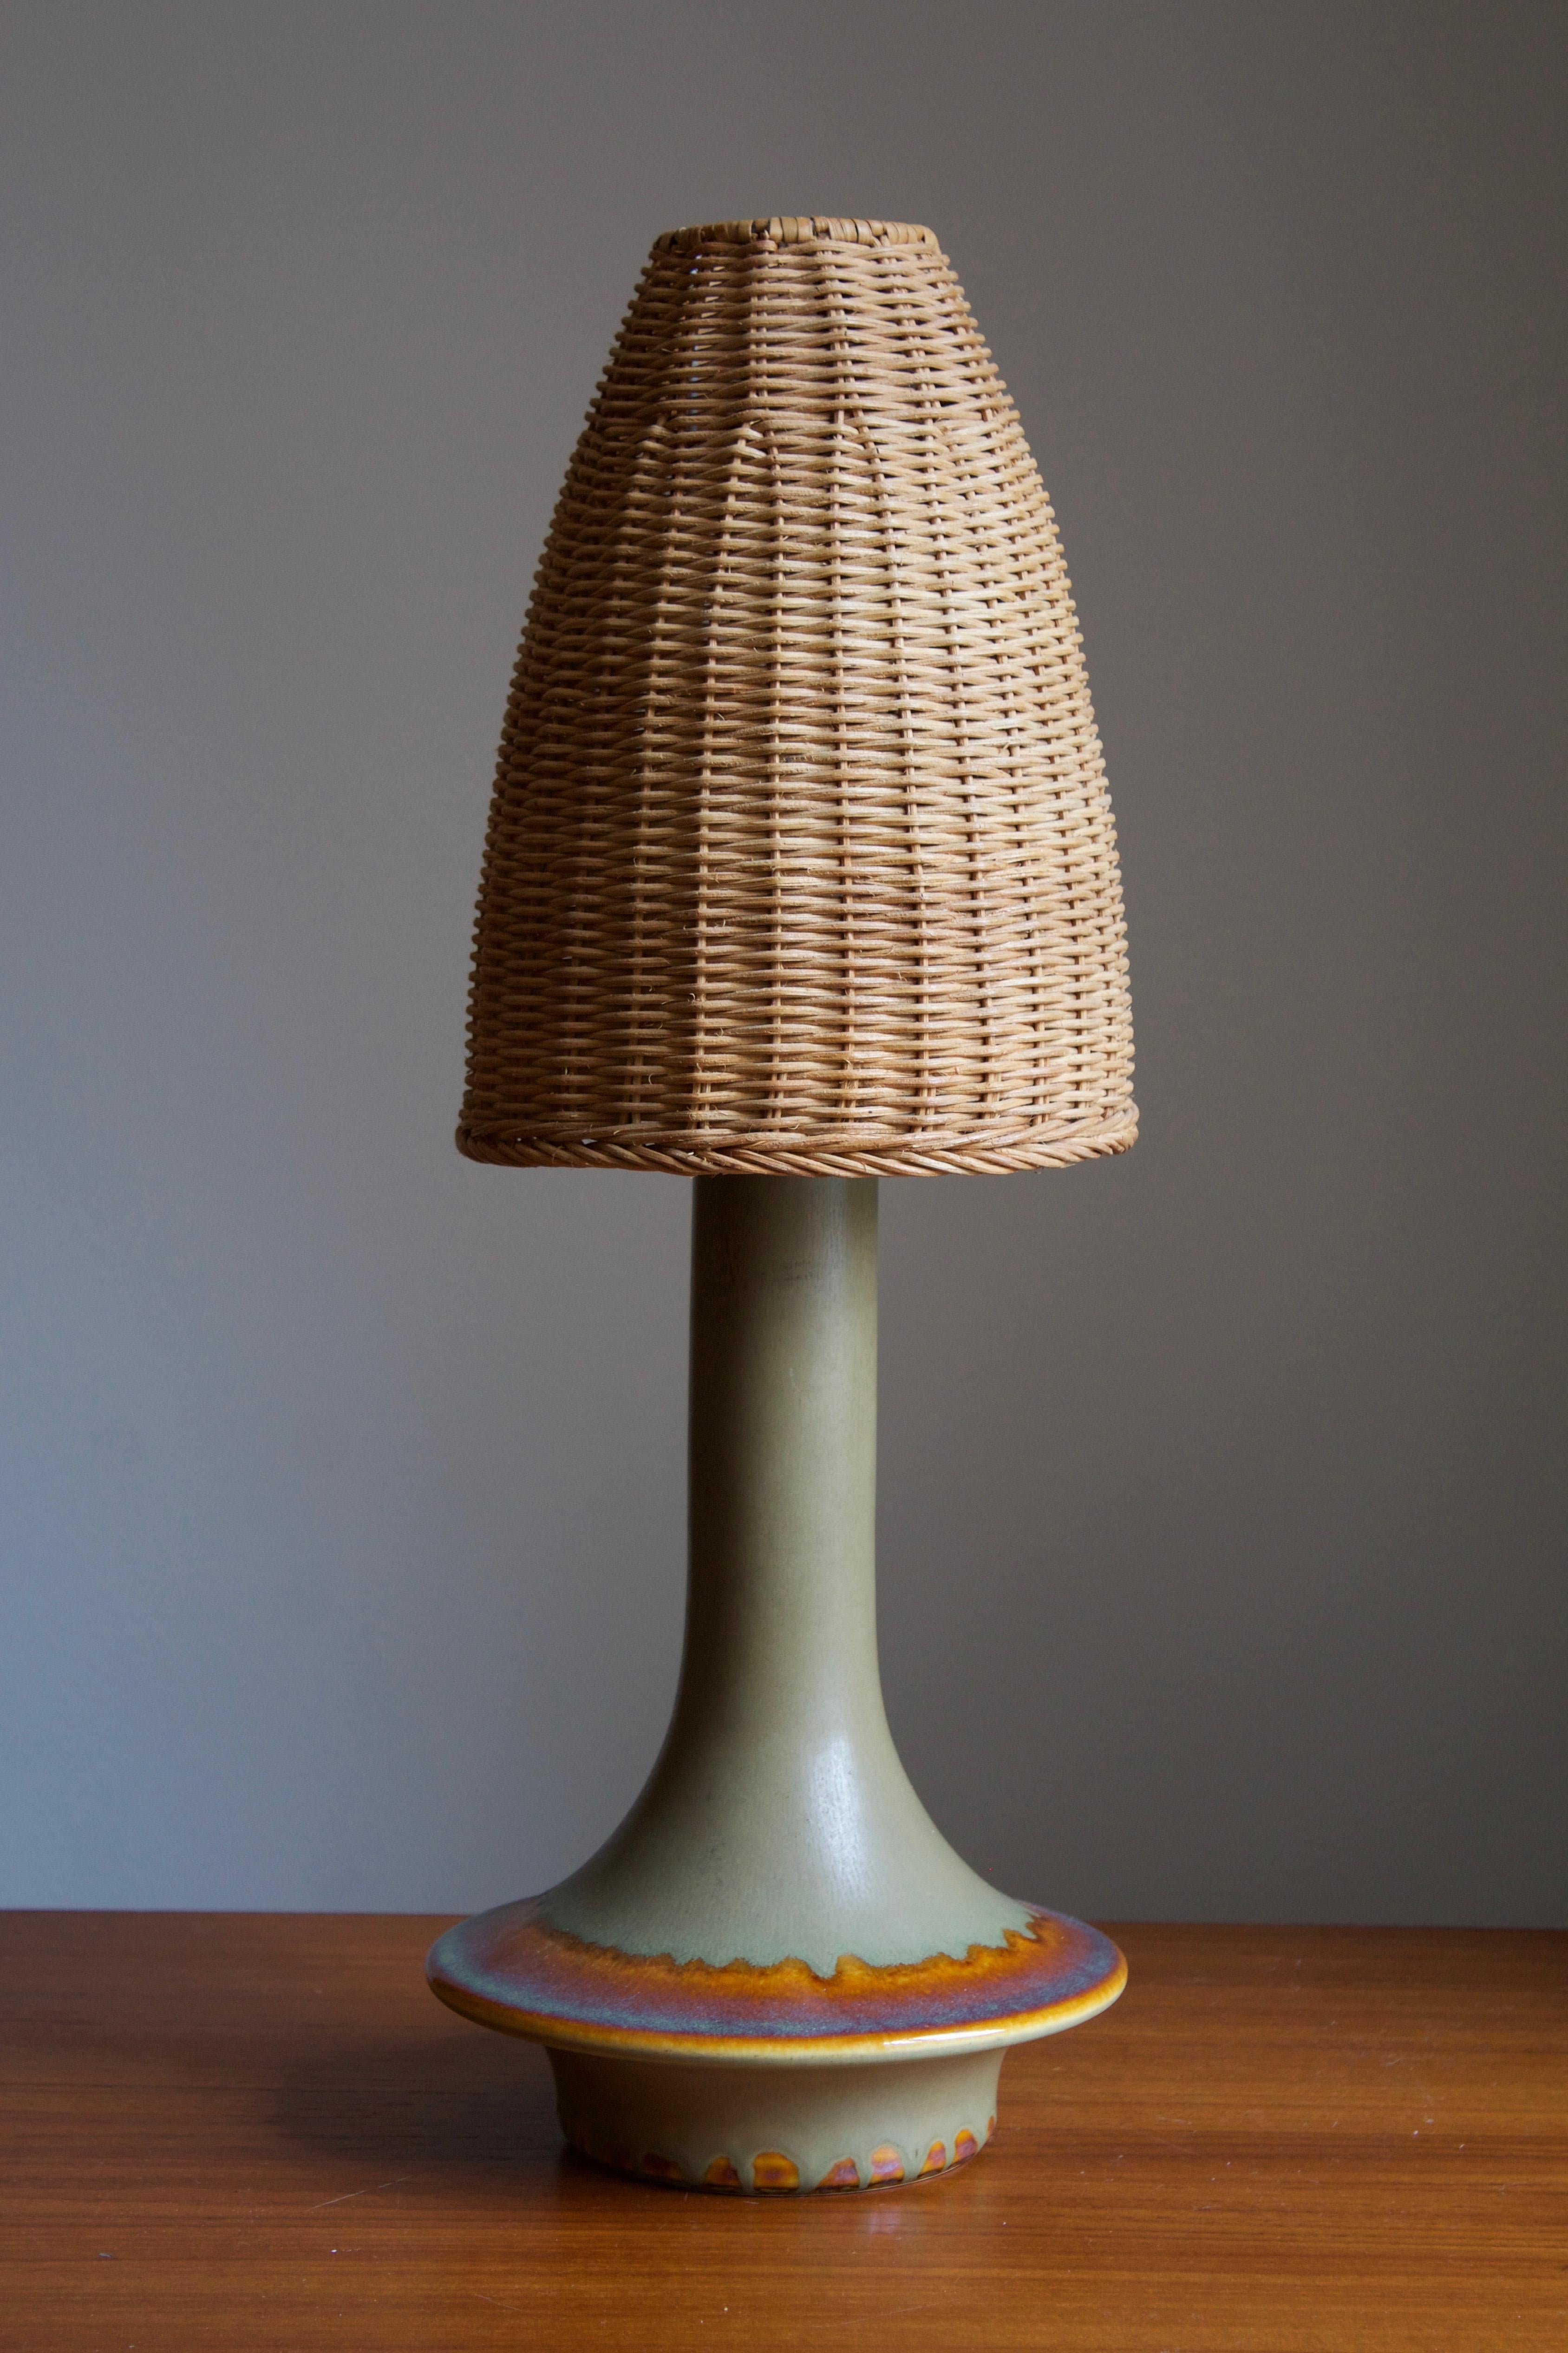 A large table lamp produced by Søholm Keramik, located on the island of Bornholm in Denmark. Features a highly artistic glazed and incised decor. 

Stated dimensions exclude the lampshade. Height includes socket. Illustrated rattan lampshade can be